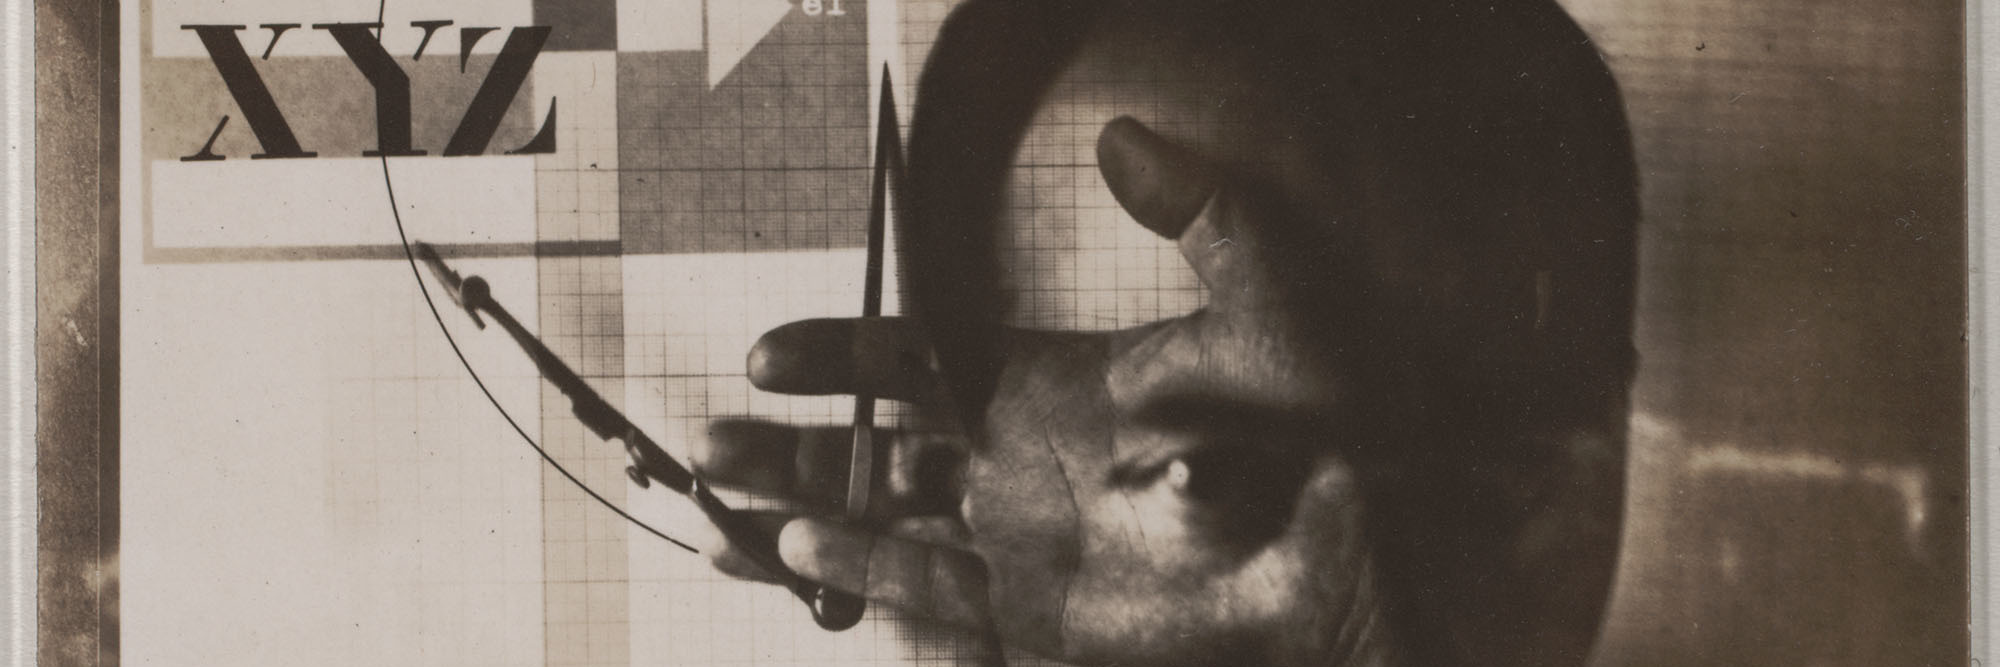 El Lissitzky. Self-Portrait. 1924. Gelatin silver print, 3 × 3 3/8″ (7.6 × 8.5 cm). The Museum of Modern Art, New York. Thomas Walther Collection. Purchase. © 2011 Artists Rights Society (ARS), New York/VG Bild-Kunst, Bonn